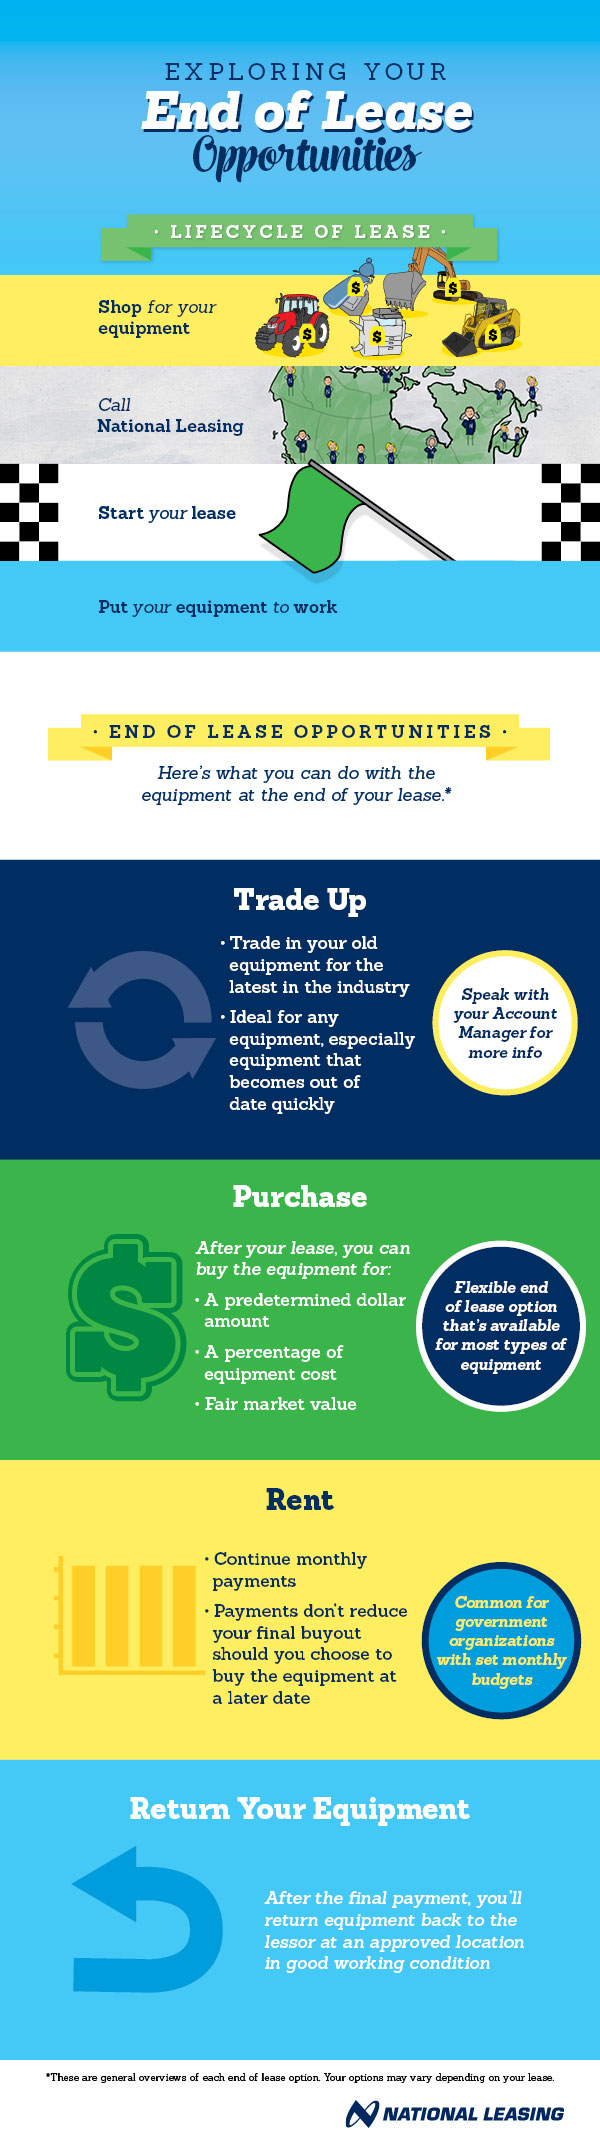 Exploring Your End of Lease Opportunities infographic